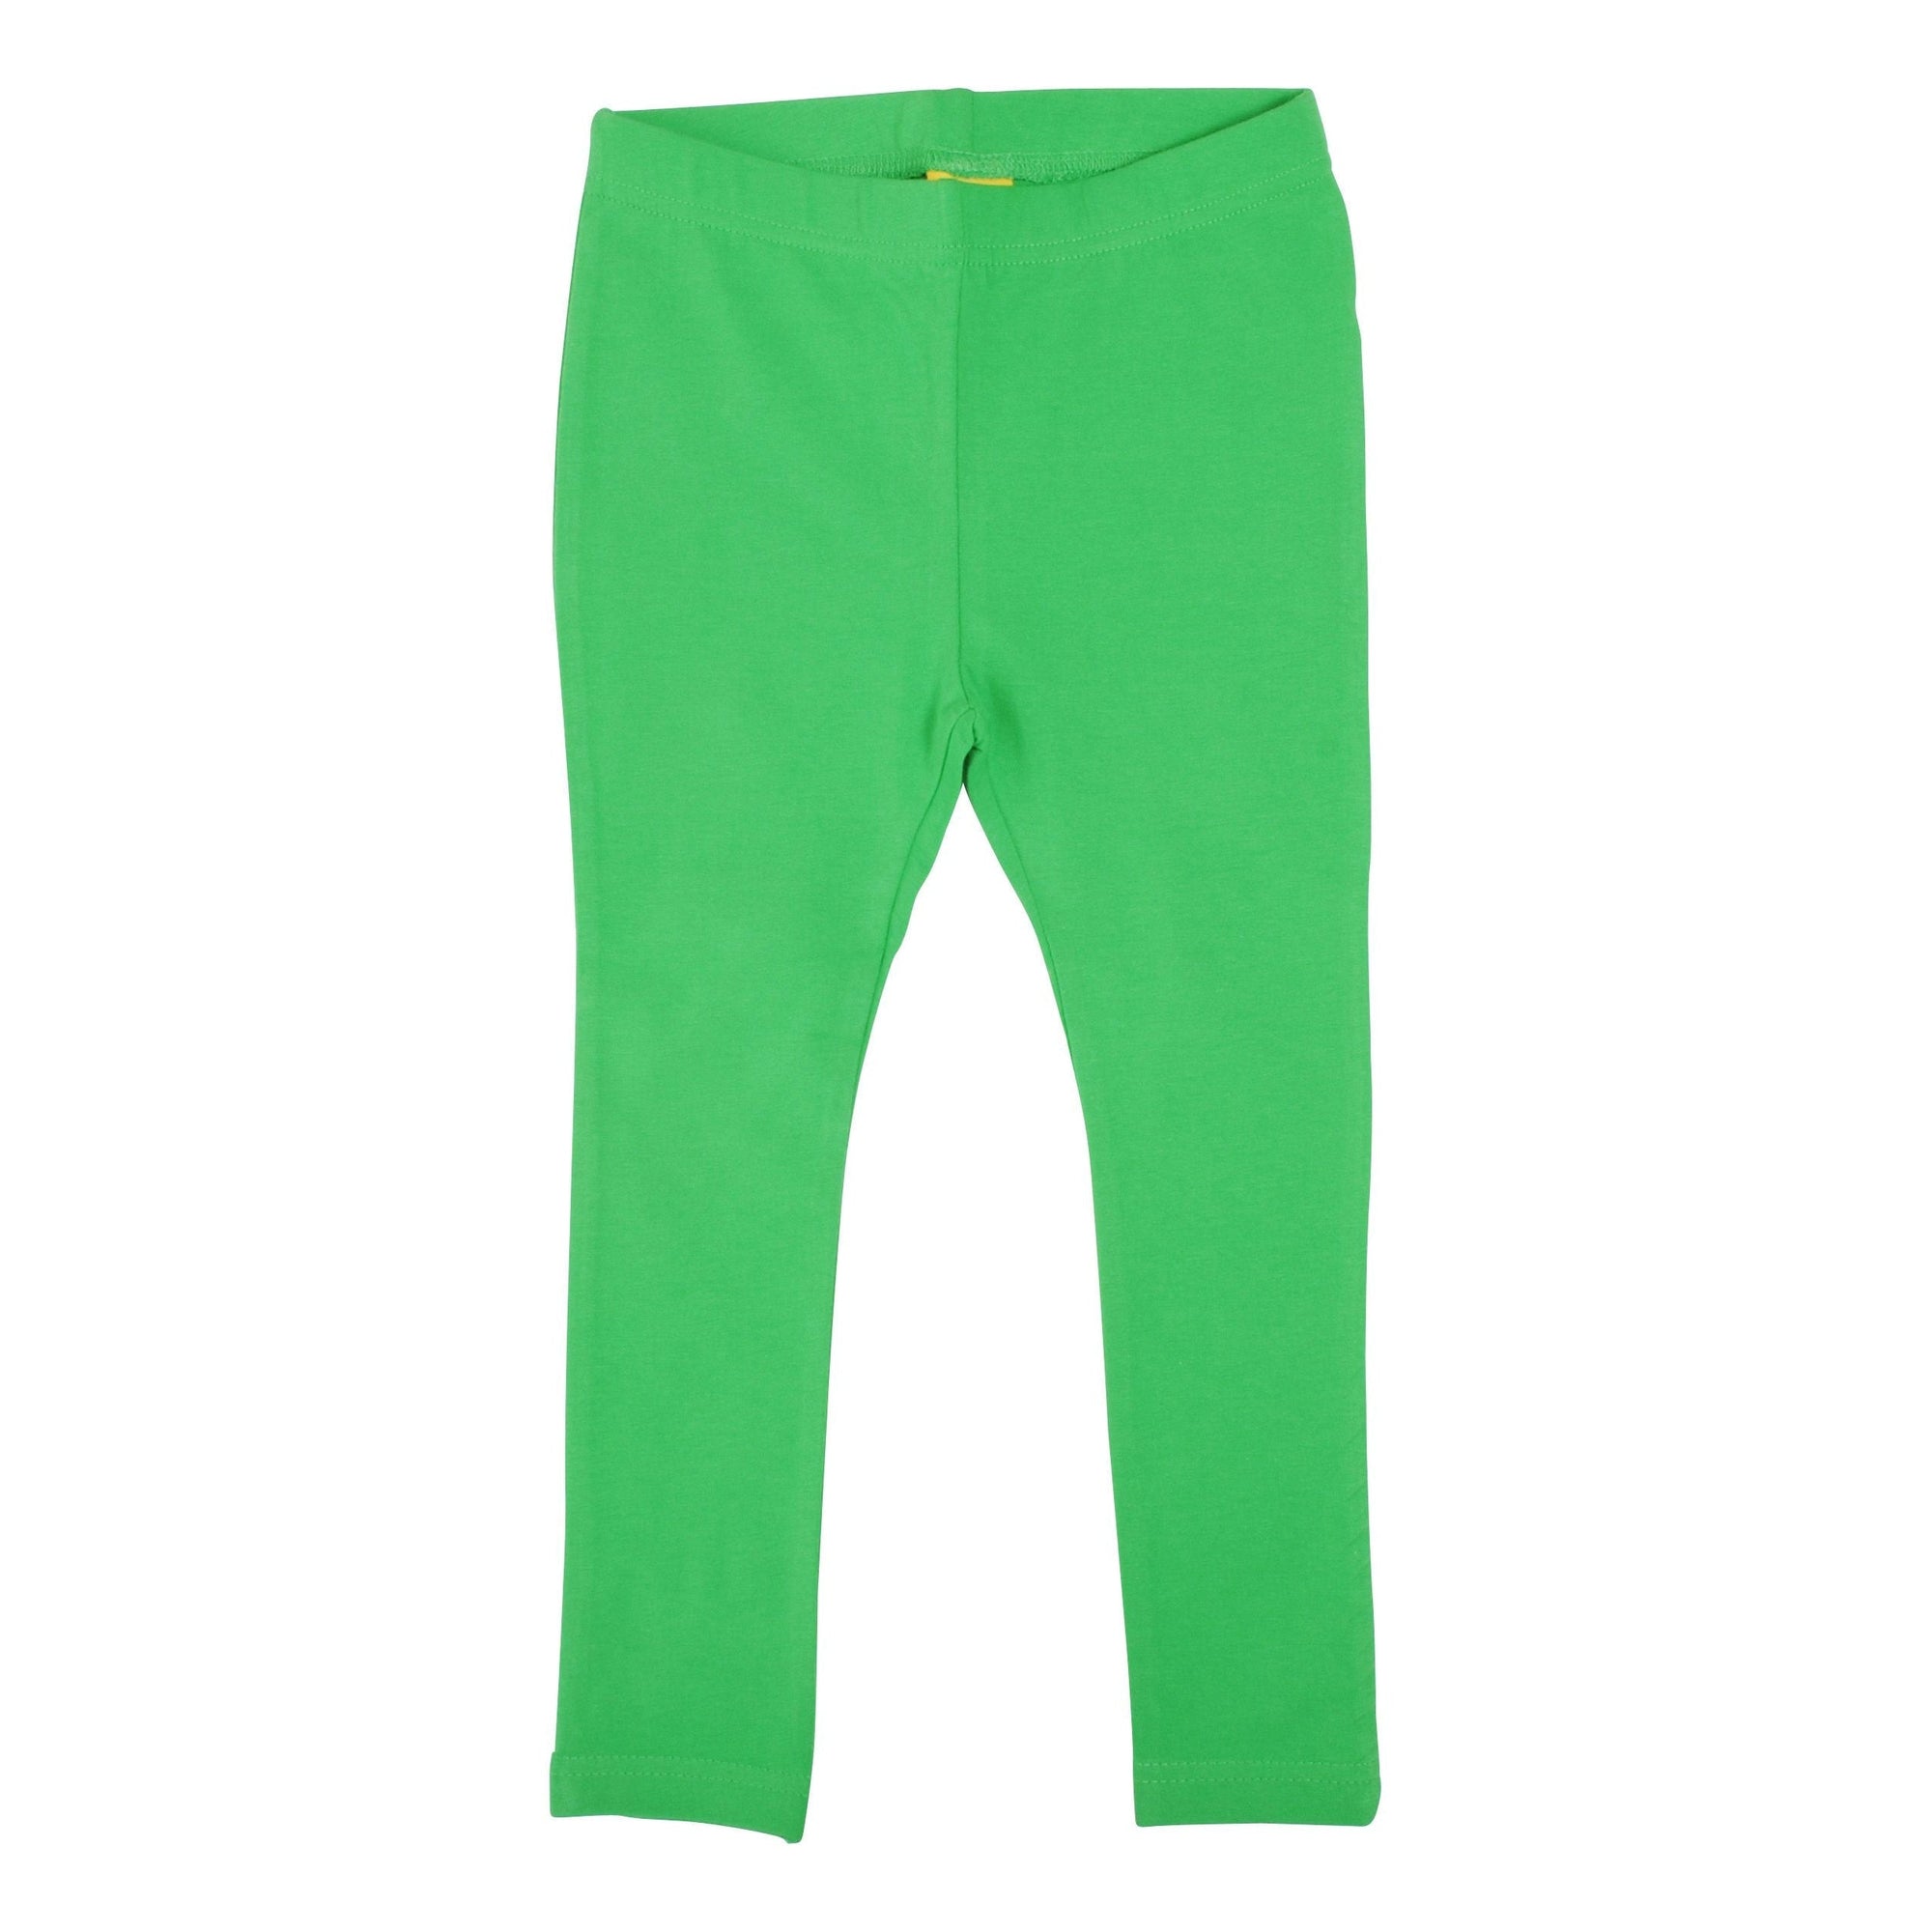 Classic Green Leggings - 2 Left Size 10-12 & 12-14 years-More Than A Fling-Modern Rascals